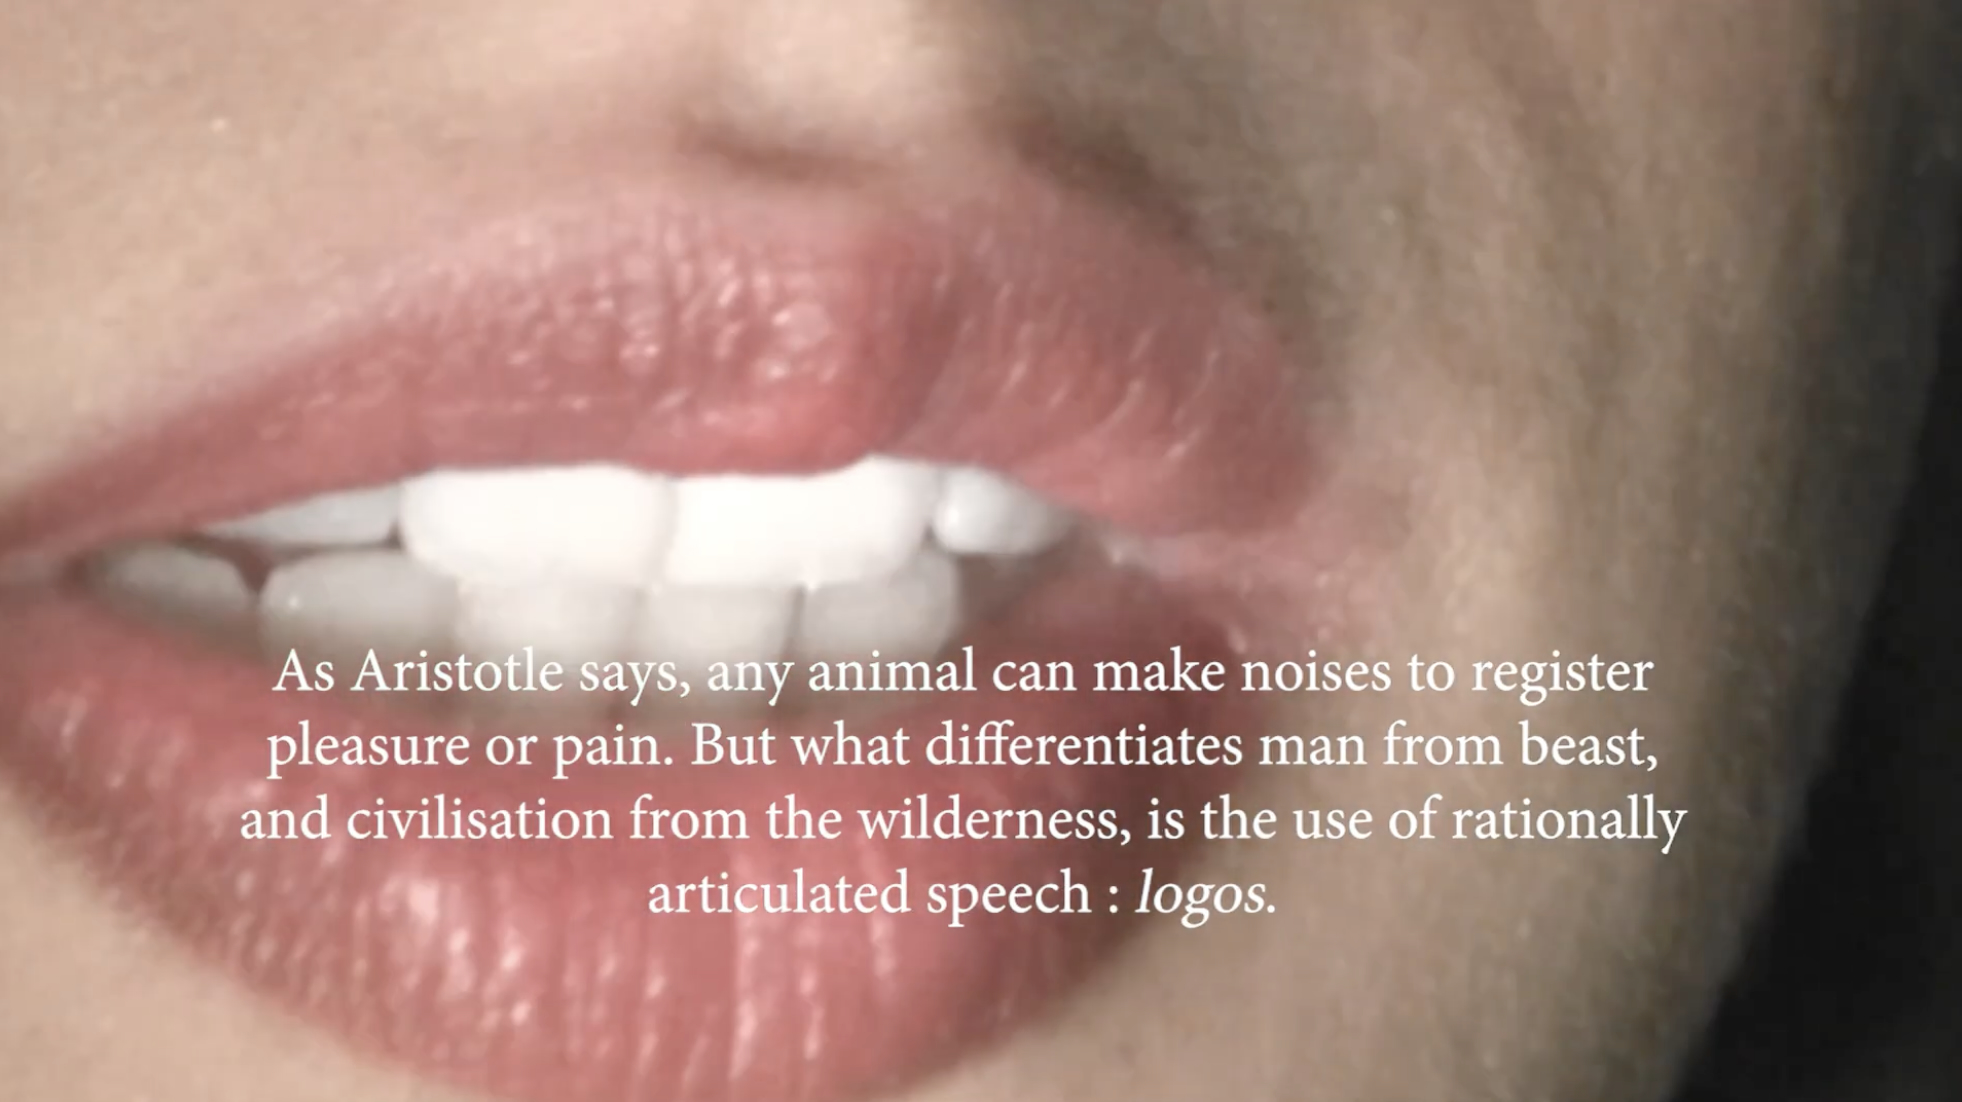 A screenshot of a 12:18 video which alternates between shots of mouths speaking and footage from popular culture films and television. The screenshot shows an opened mouth that is overlayed with white text saying "As Aristotle says, any animal can make noises to register pleasure or pain. But what differentiates man from beast, and civilisation from the wilderness, is the use of rationally articulated speech : logos."